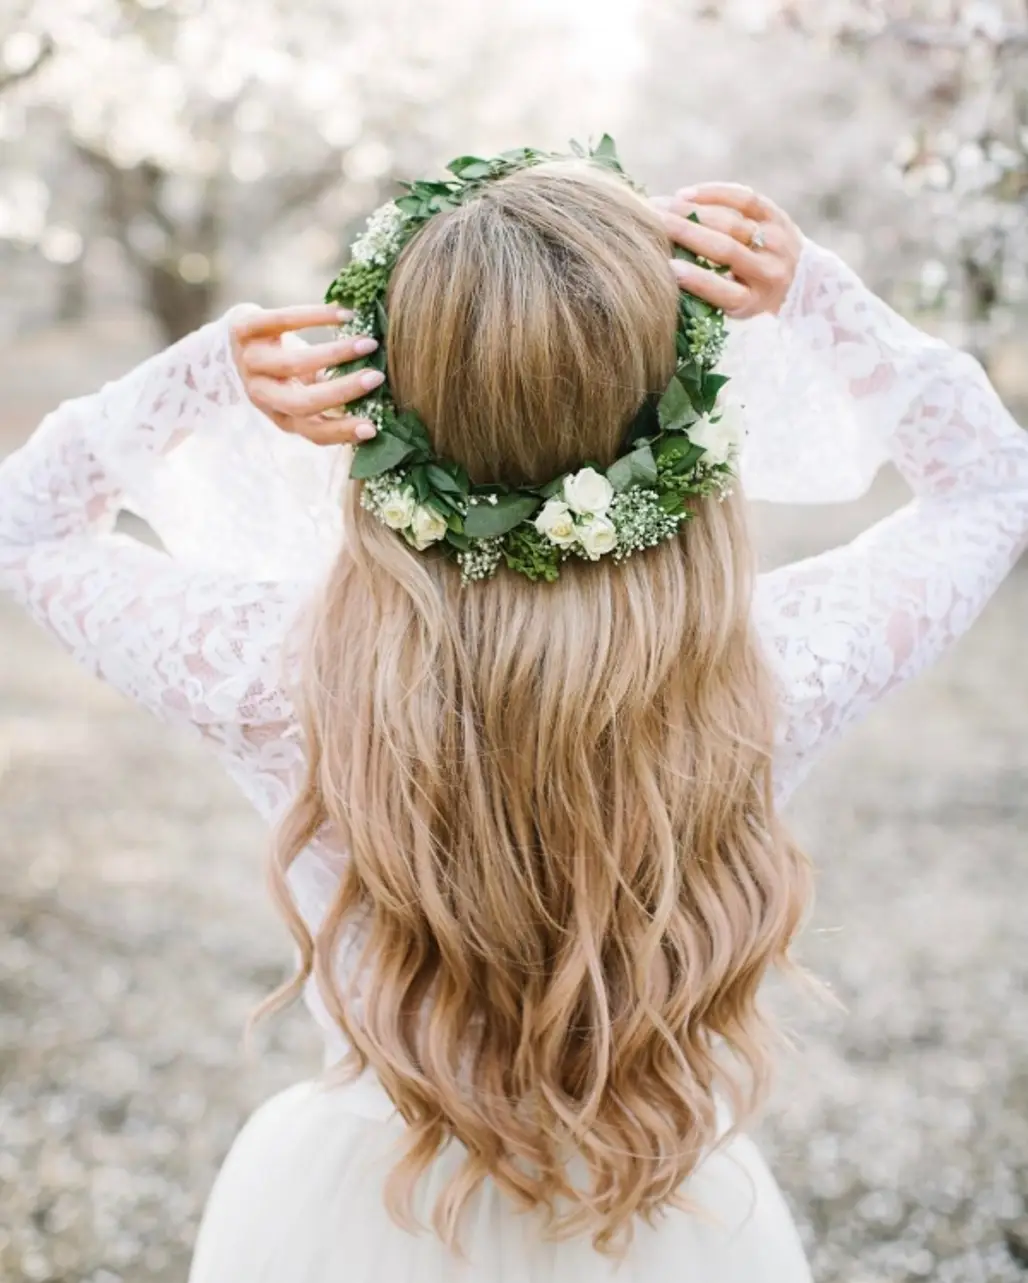 hair,clothing,fashion accessory,hair accessory,hairstyle,